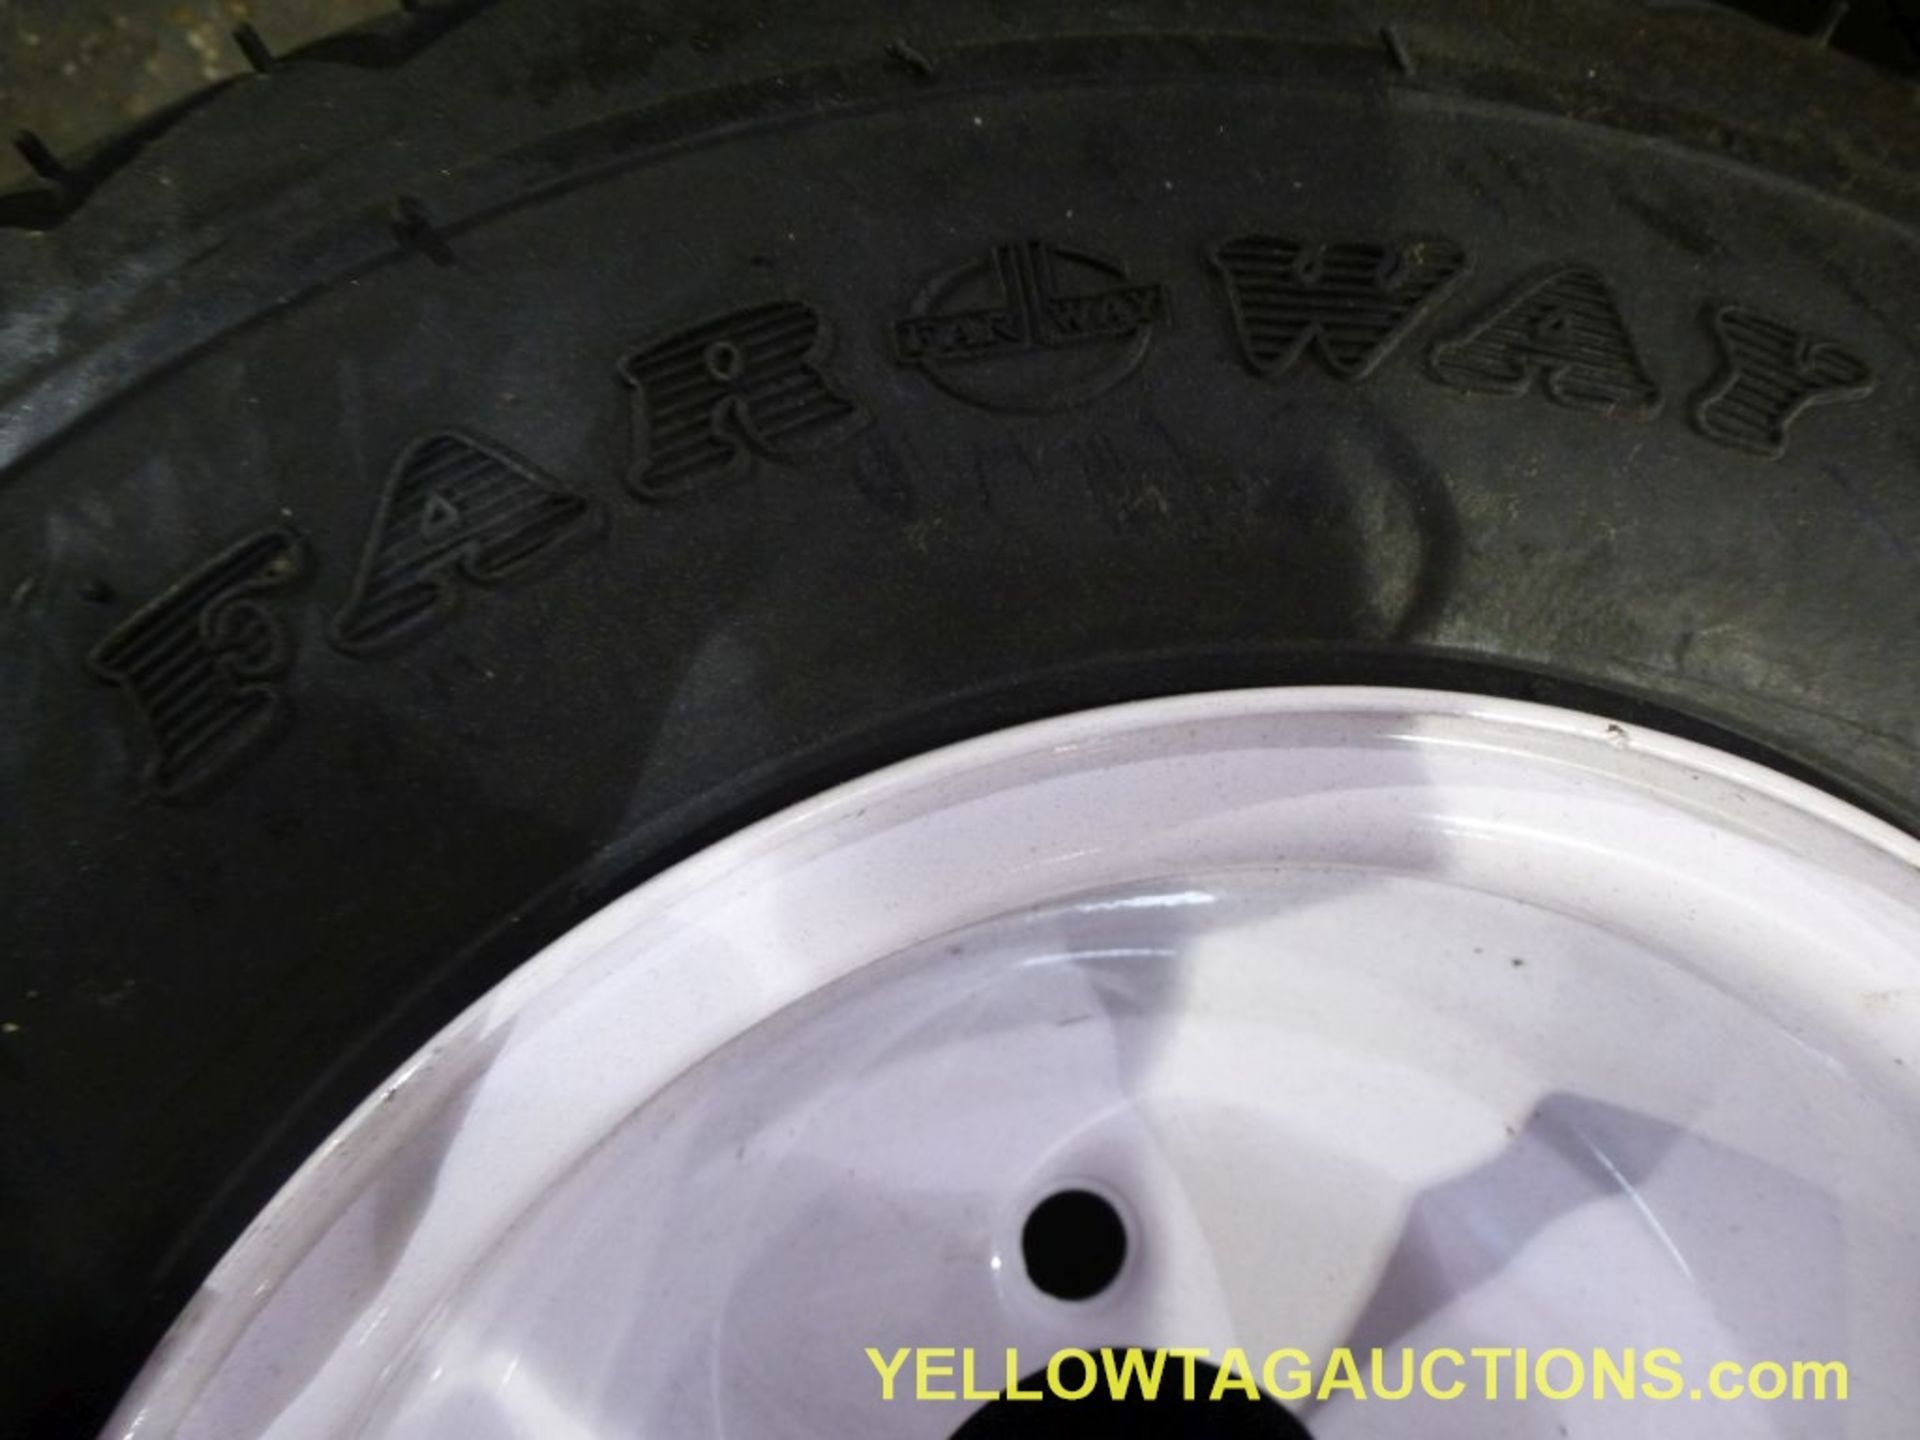 Lot of (12) FarWay 6-Ply Nylon Tires & Wheels|18 X 8.50 - 8NHS|Tag: 432 - Image 3 of 8